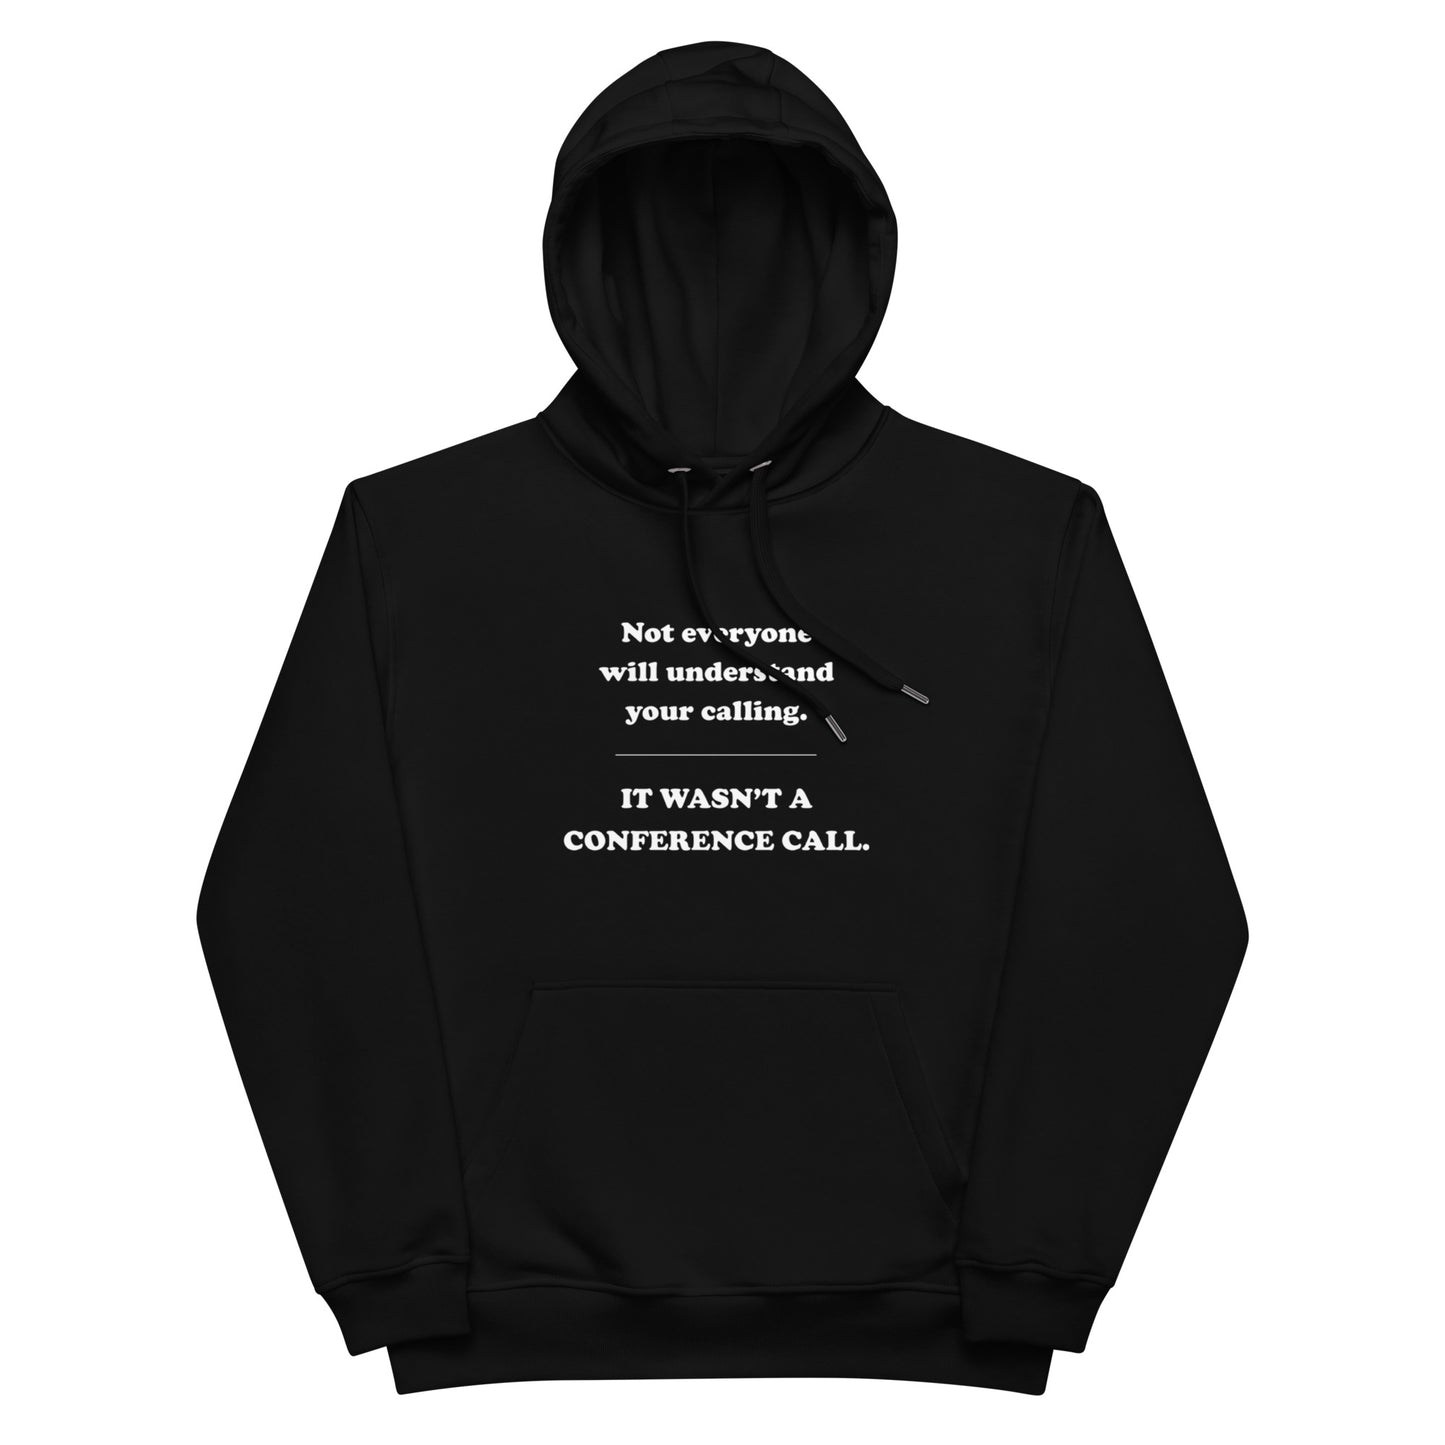 Premium eco hoodie - Conference Call (White Font)